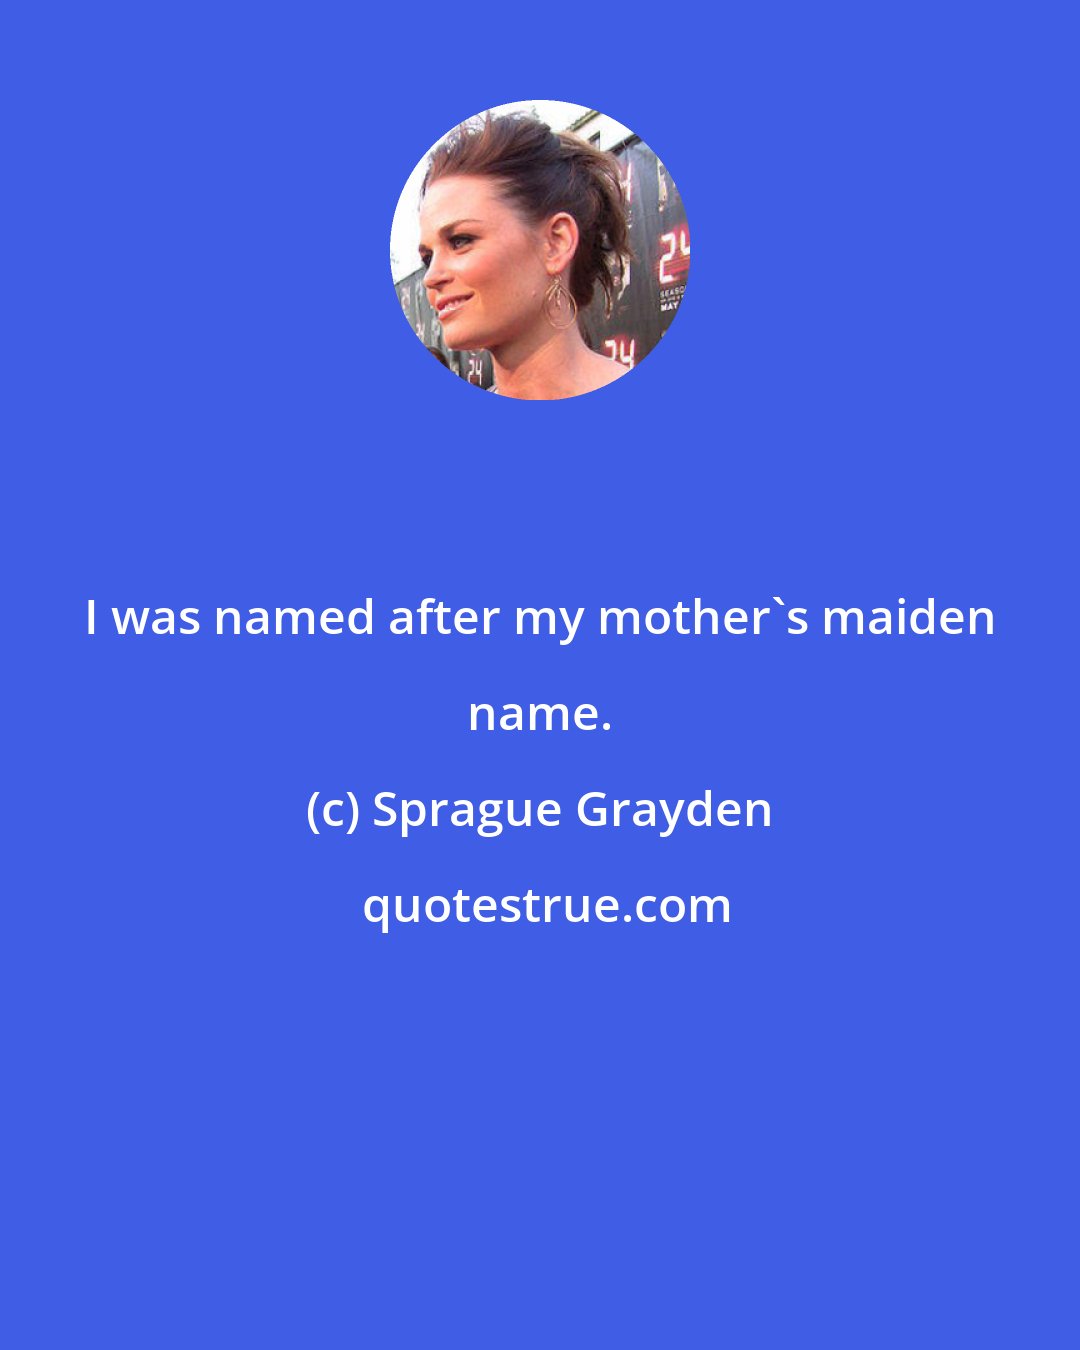 Sprague Grayden: I was named after my mother's maiden name.